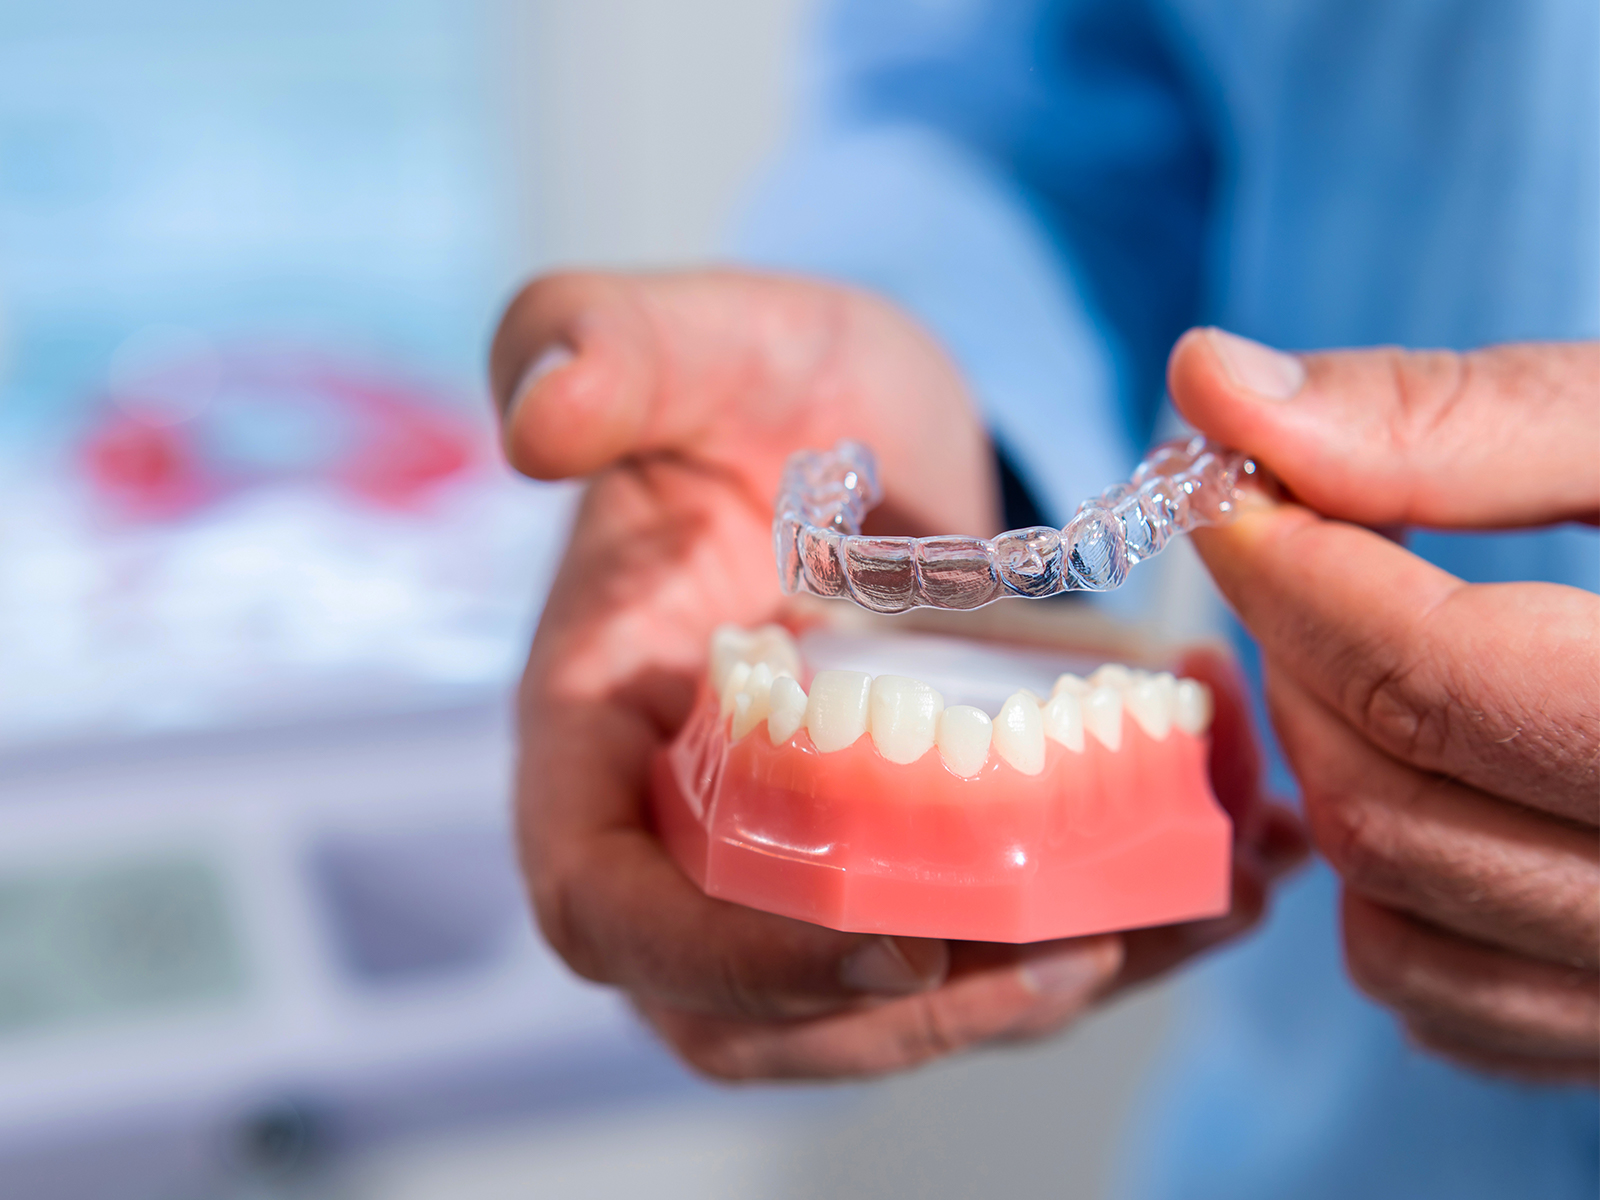 How Long Does Invisalign Take To Straighten Your Teeth?